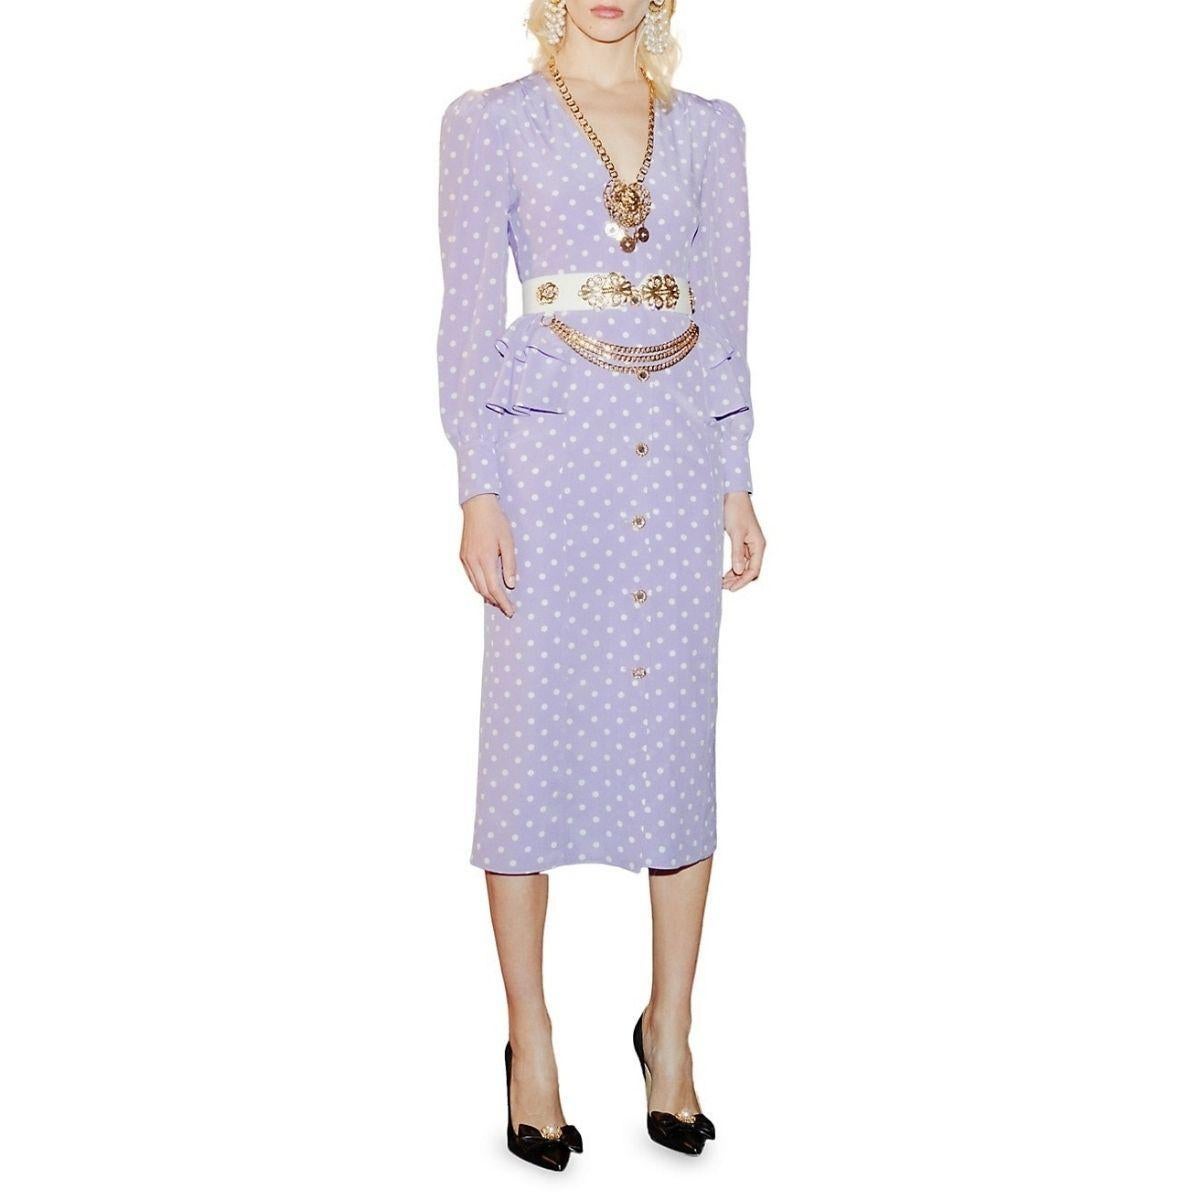 Purple silk polka dot fitted dress
Round neck
Back zip fastening
Short sleeves
Belted waist
Rear central vent
Mid-length.
Composition: Silk 100%
Lining: Polyamide 100%, Cupro 100%
Made in Italy